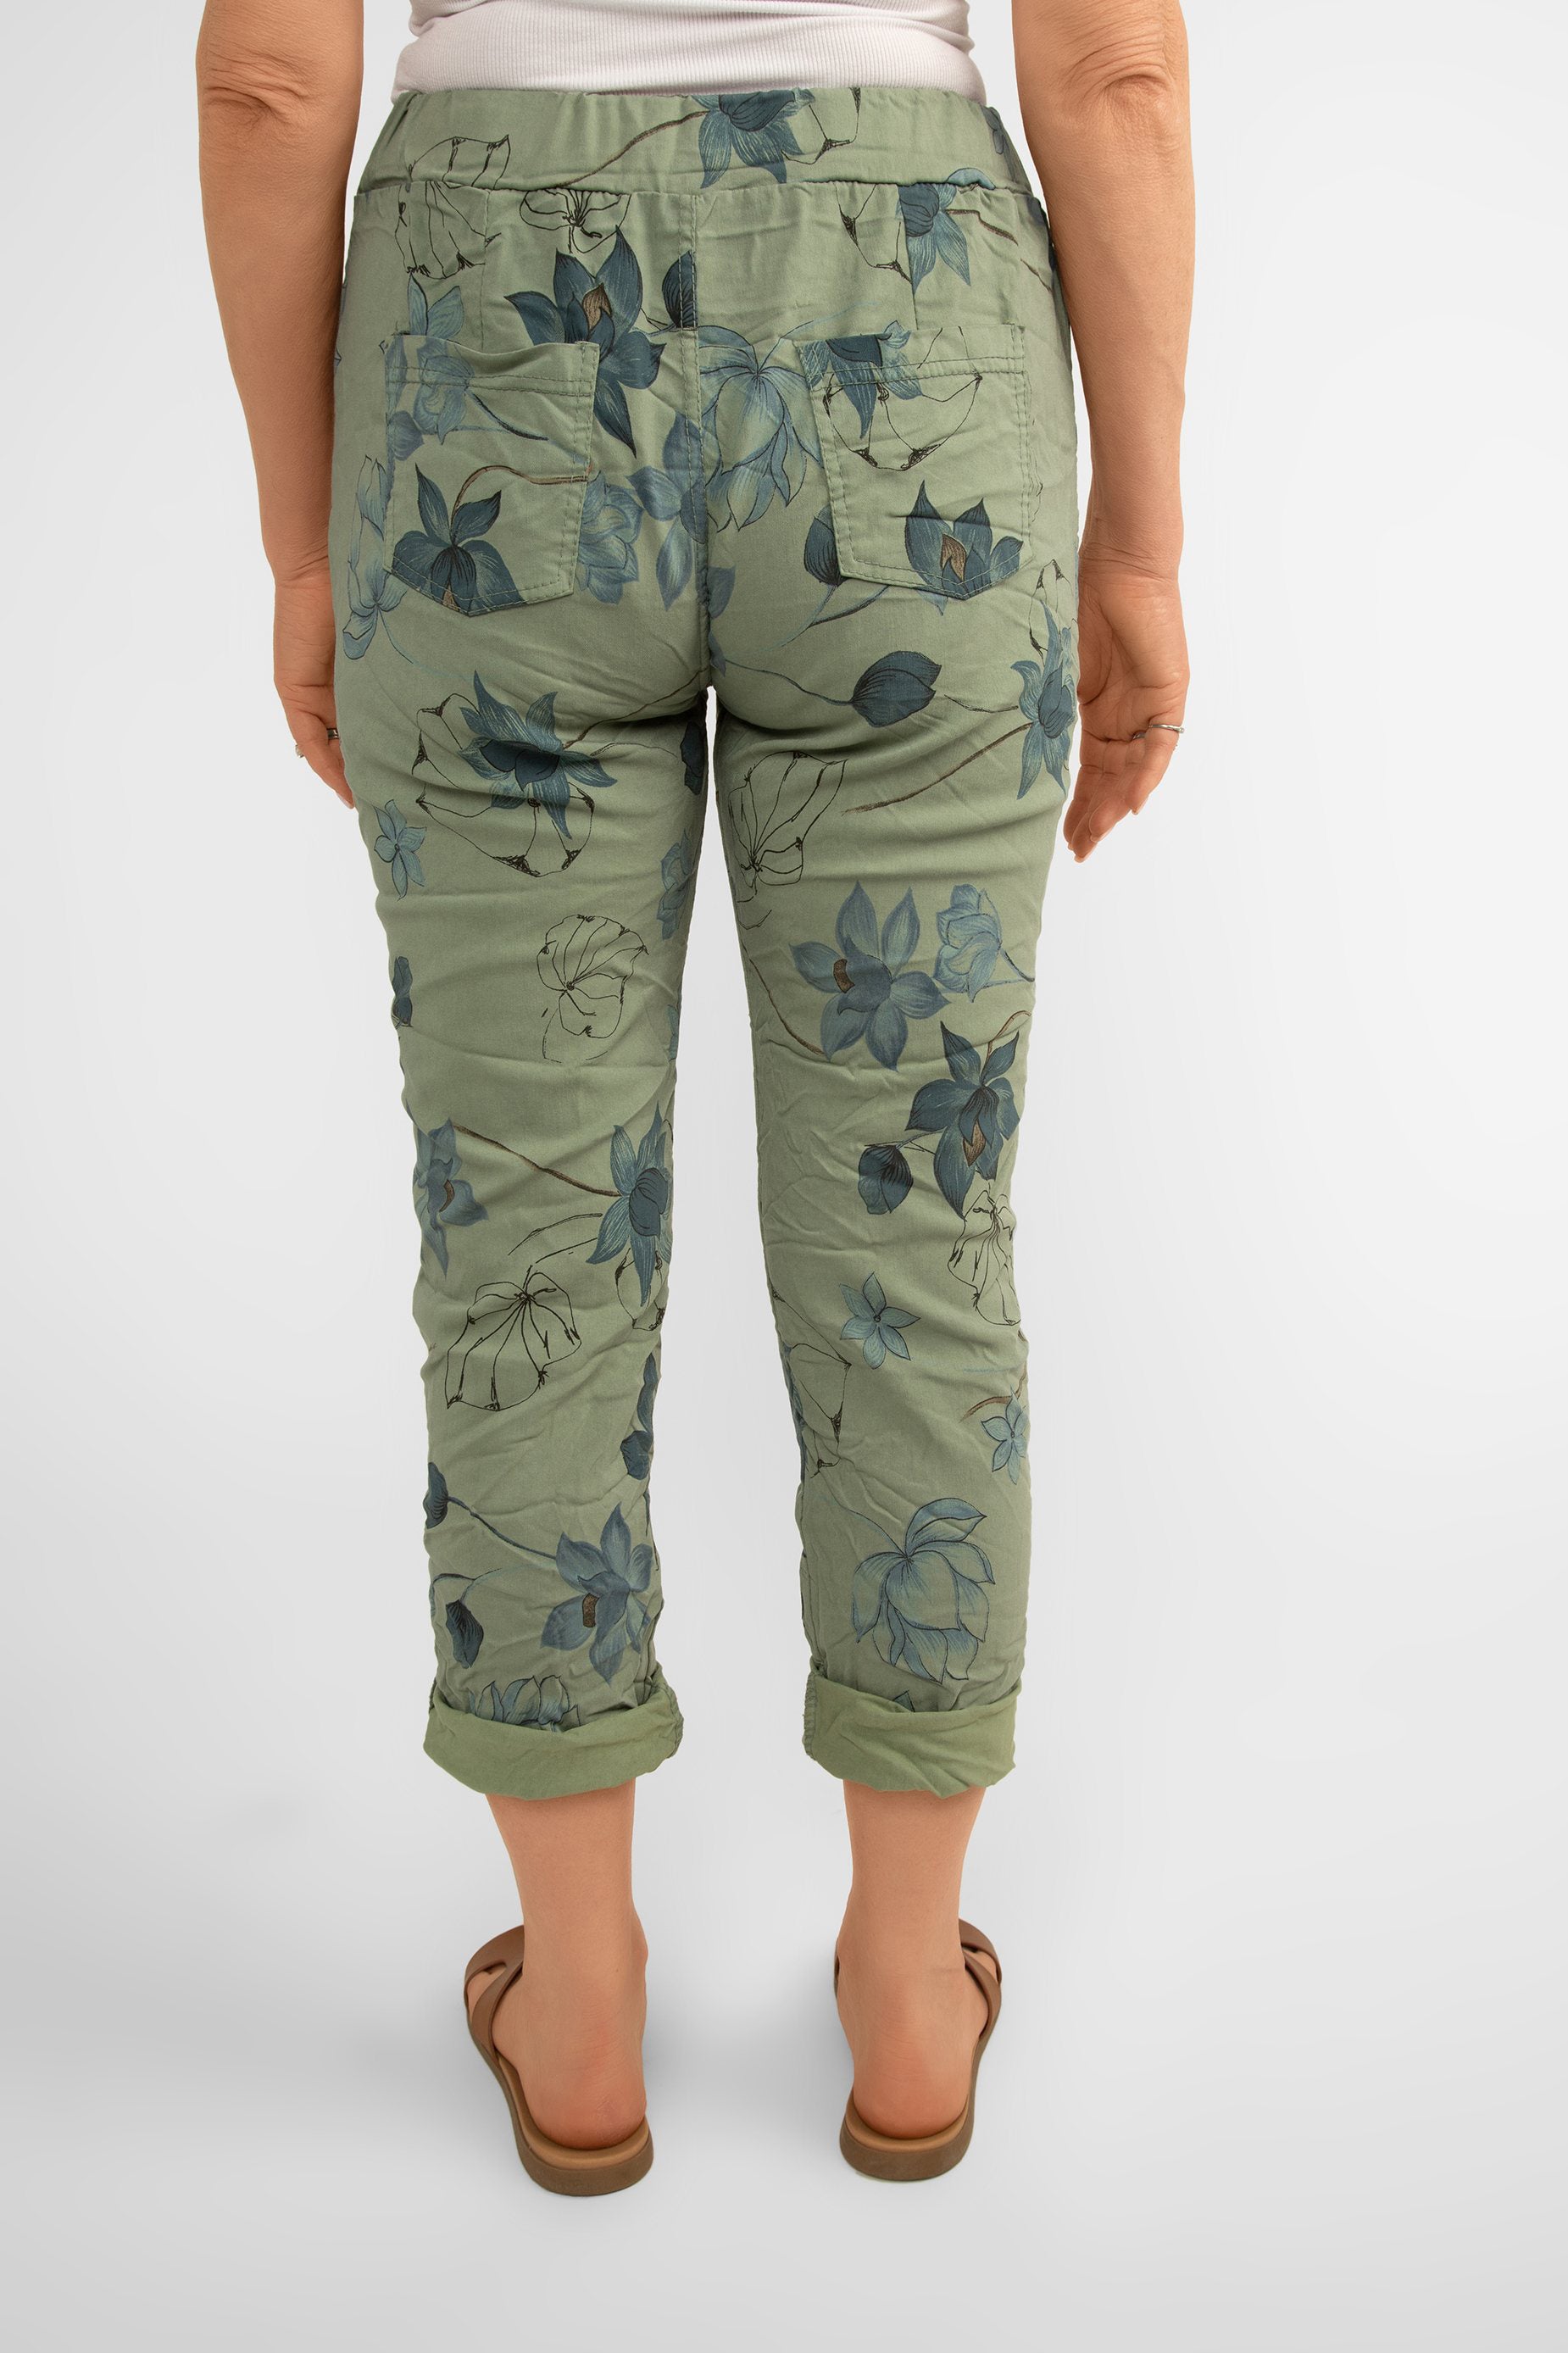 Back view of Bella Amore (21036) Women's Pull On Crinkle Pants with Side Pockets, Rolled Hem, and Blue Lotus Flower Print in Military Green